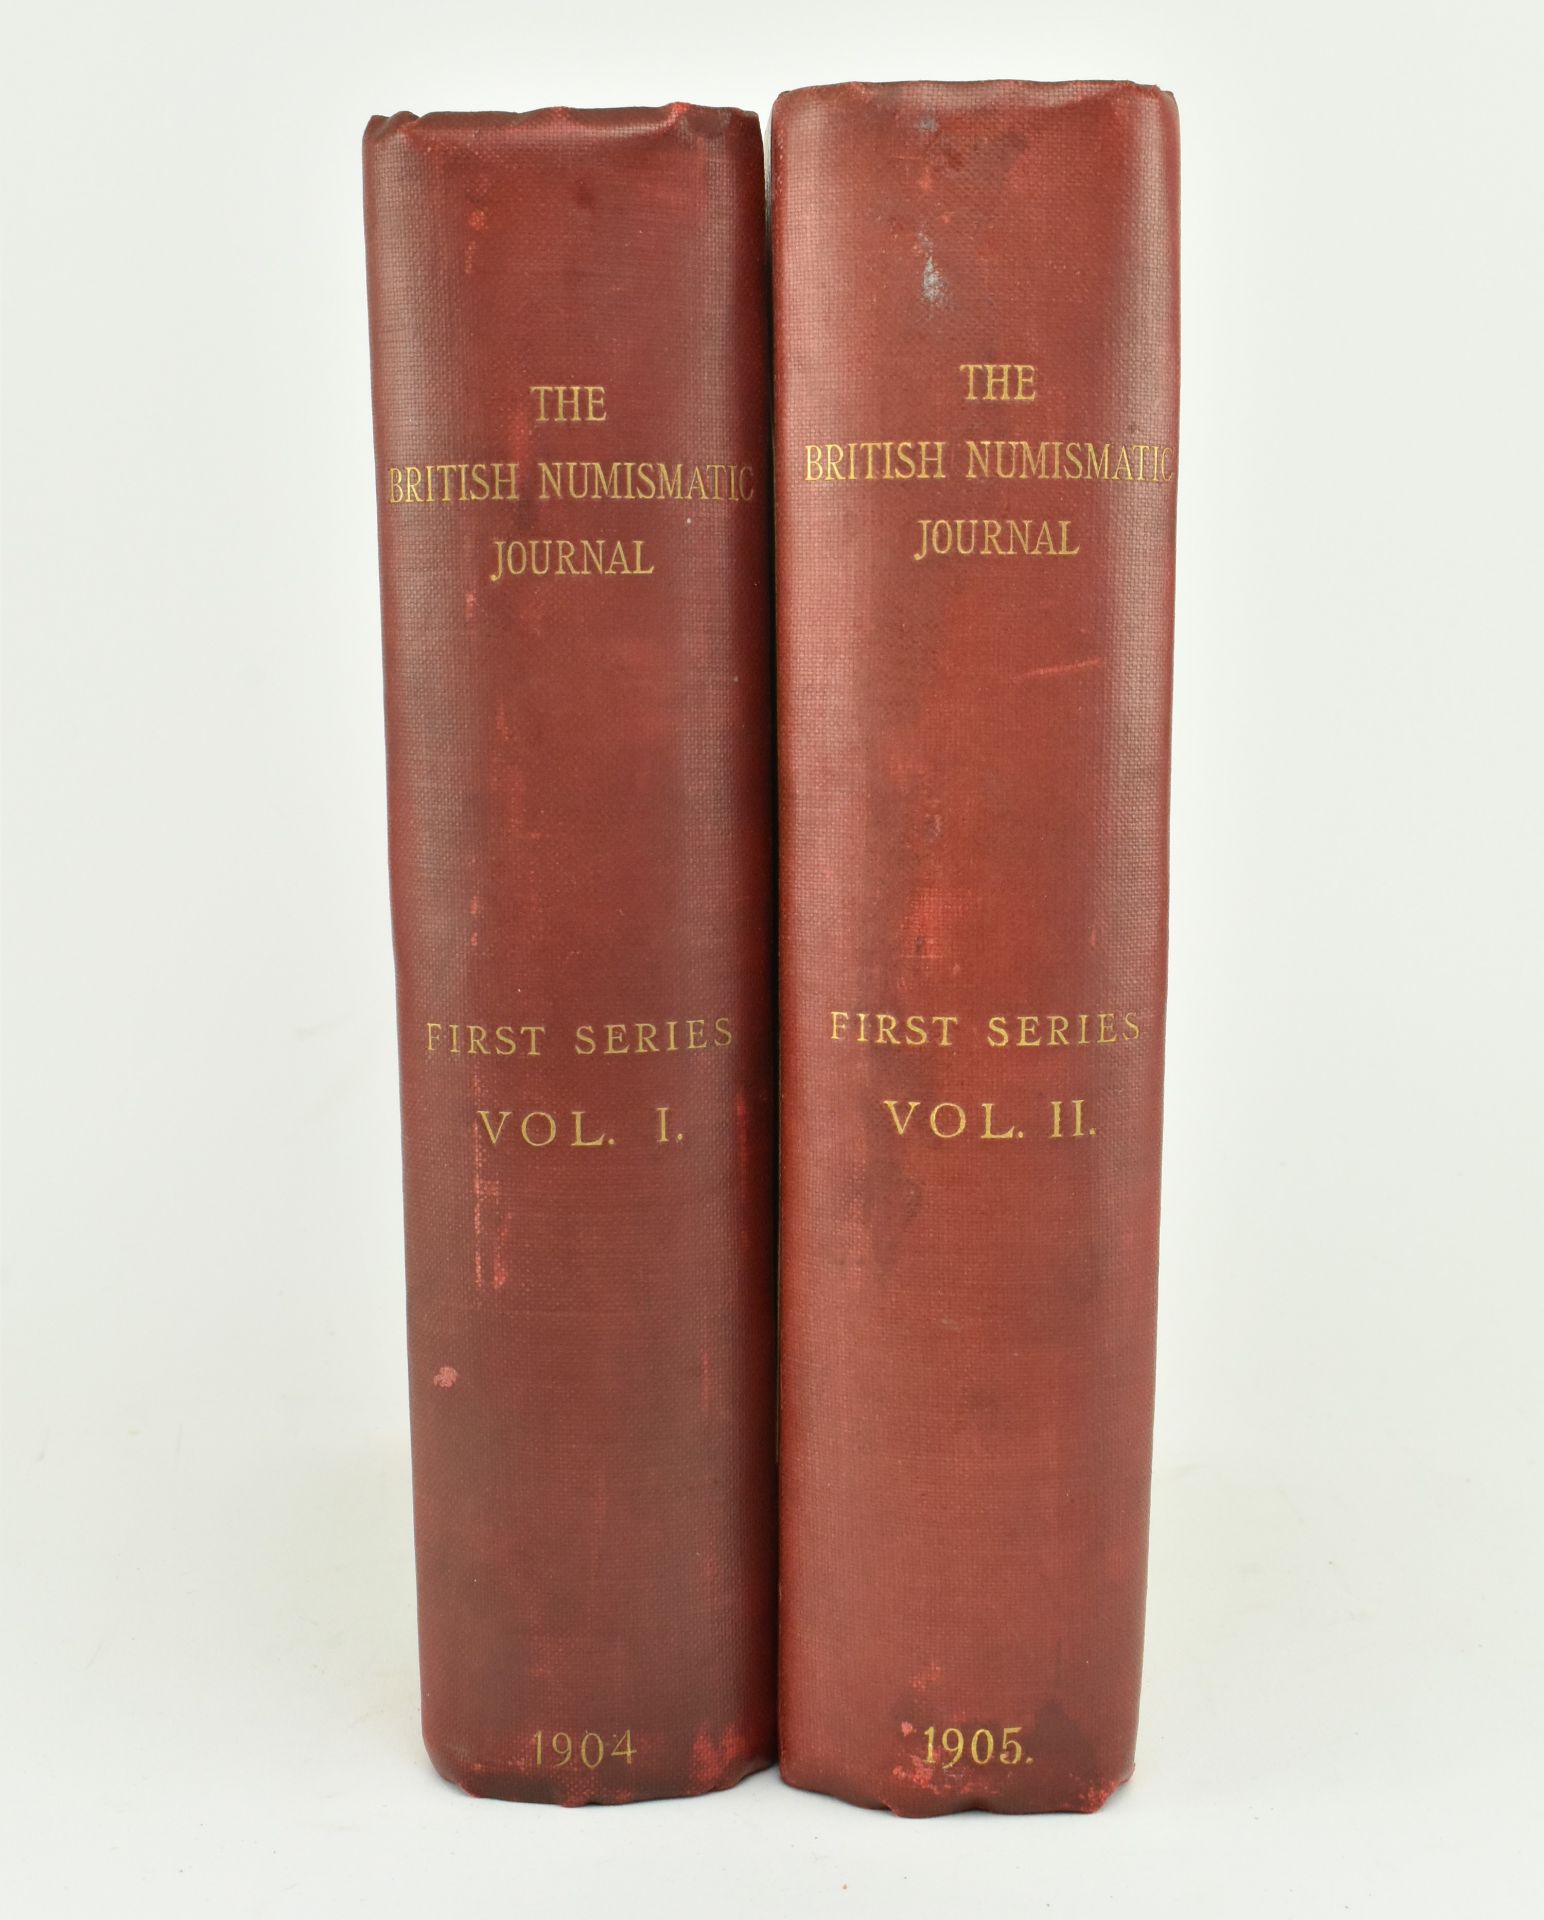 1905 THE BRITISH NUMISMATIC JOURNAL FIRST SERIES VOL I & II - Image 2 of 8